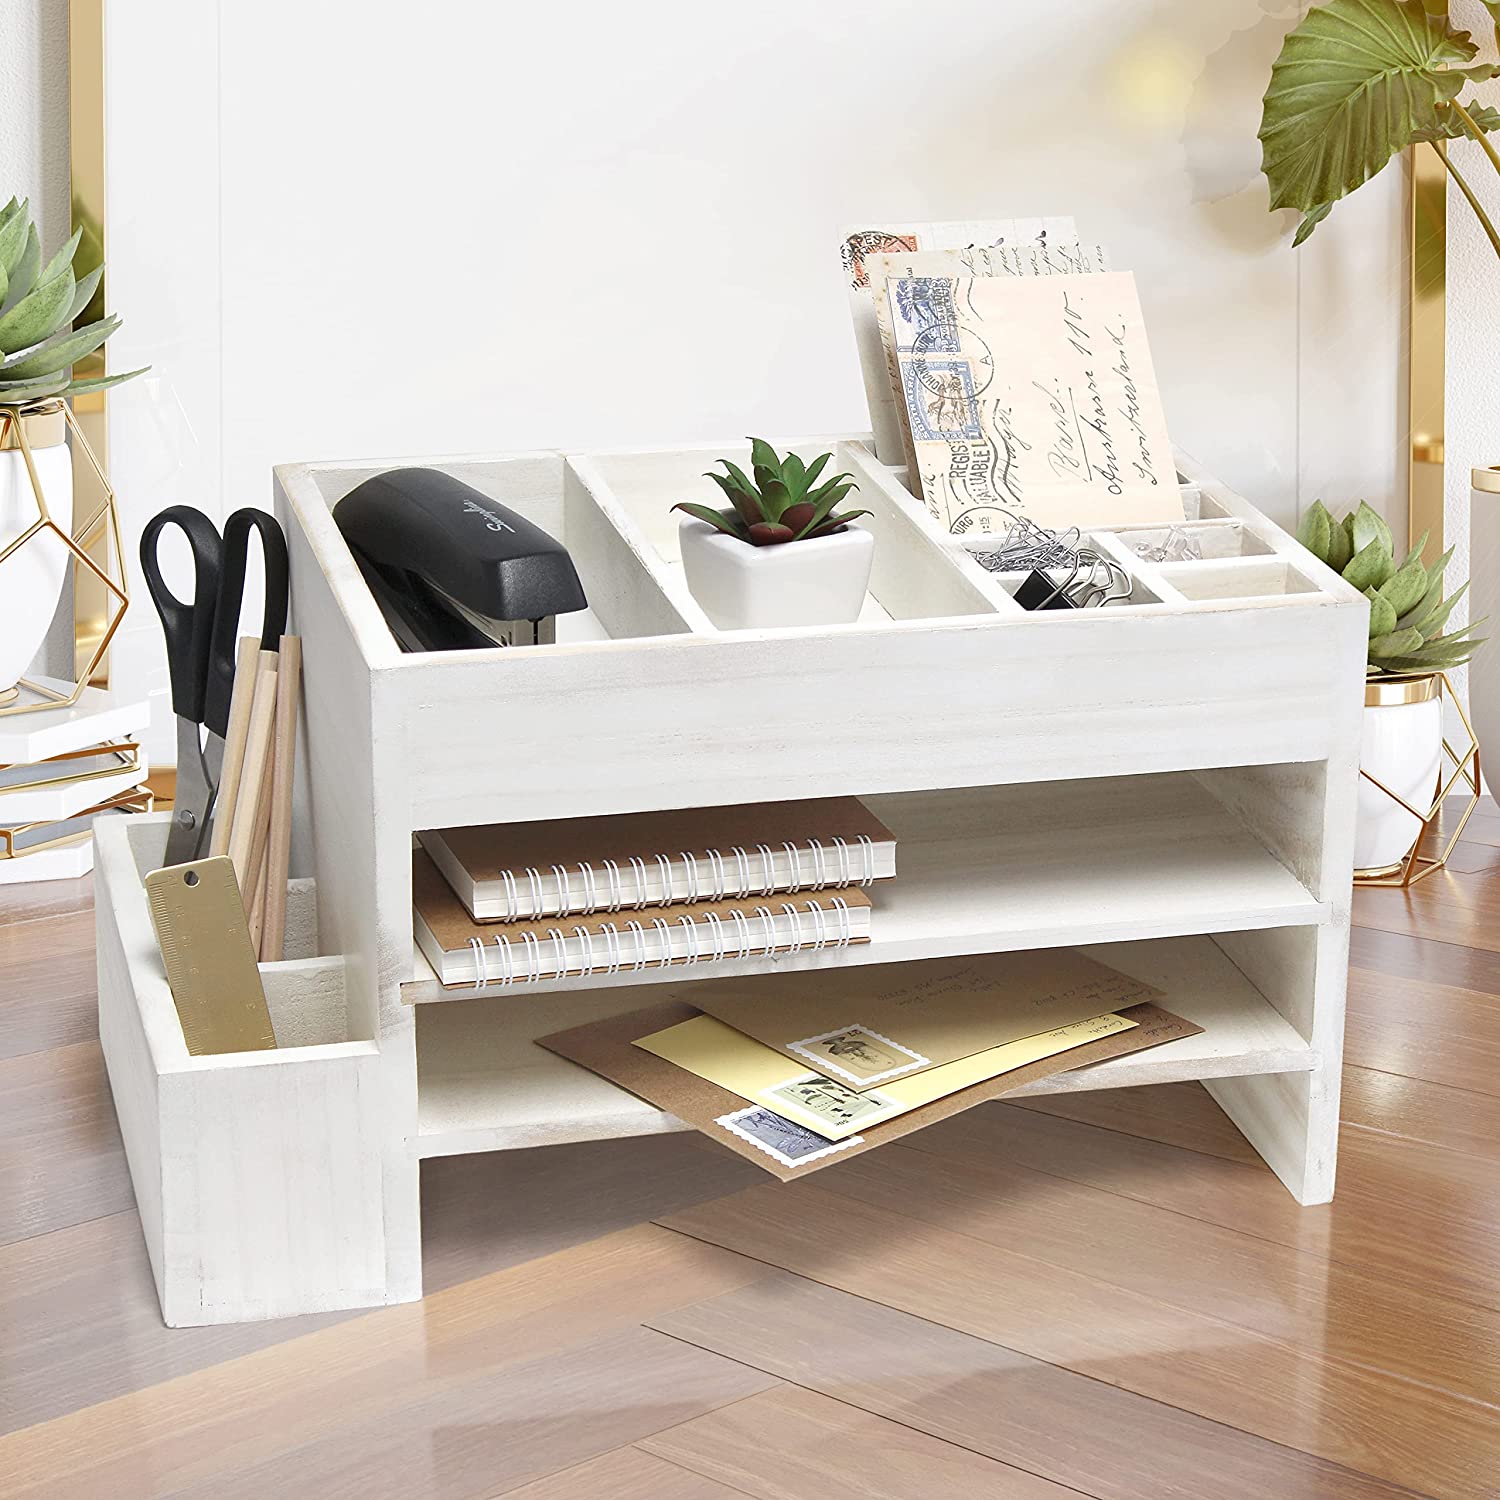 Elegant Designs HG1021-WWH Home Office Wood Tiered Organizer with Storage Cubbies and Letter Tray Desk Caddy, White Wash